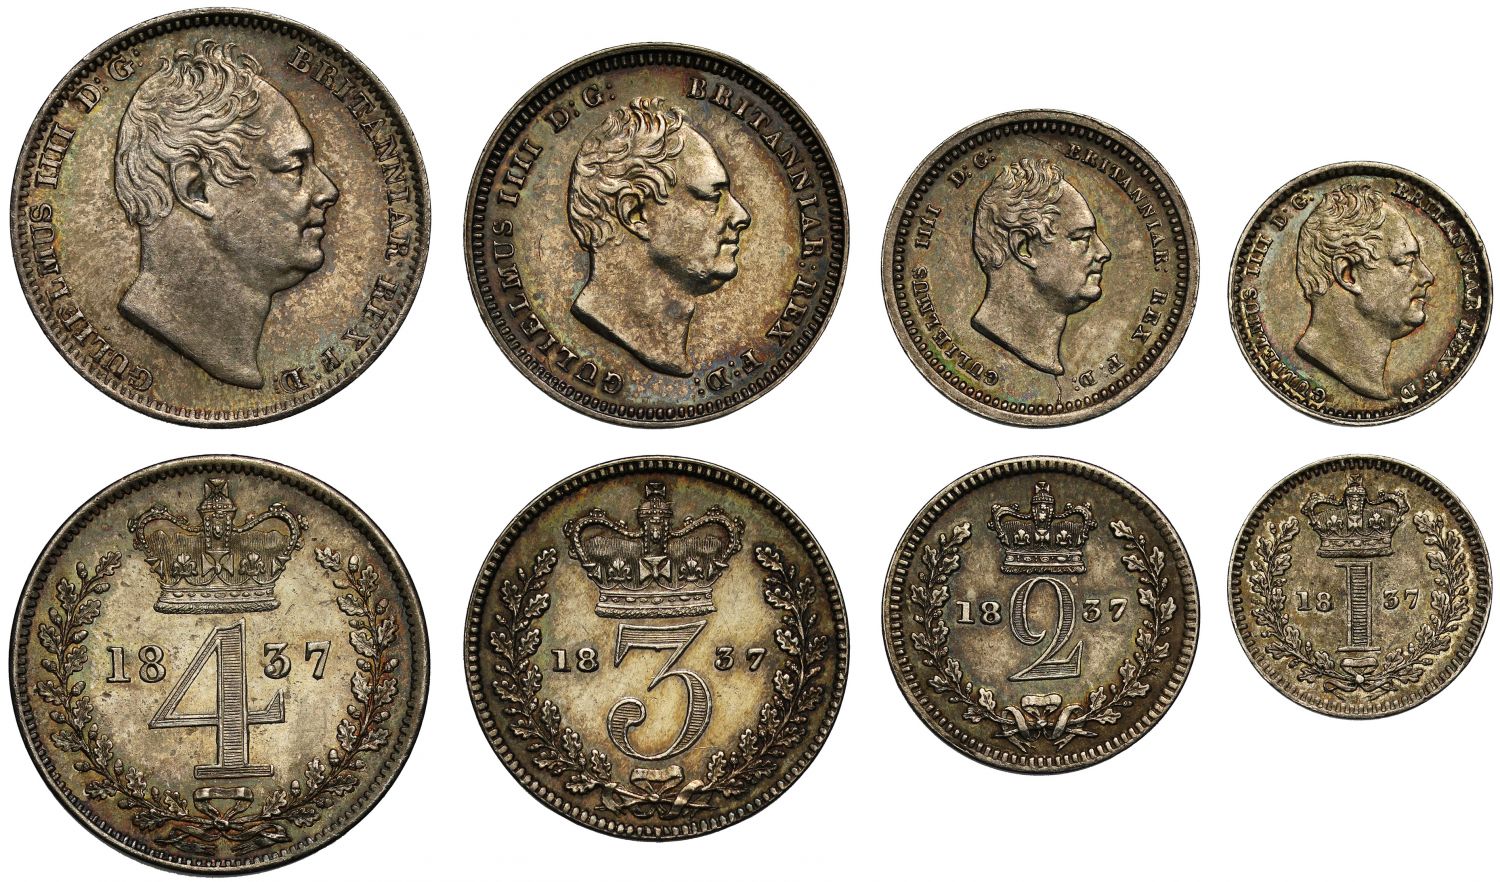 William IV 1837 Maundy Set, final year of reign